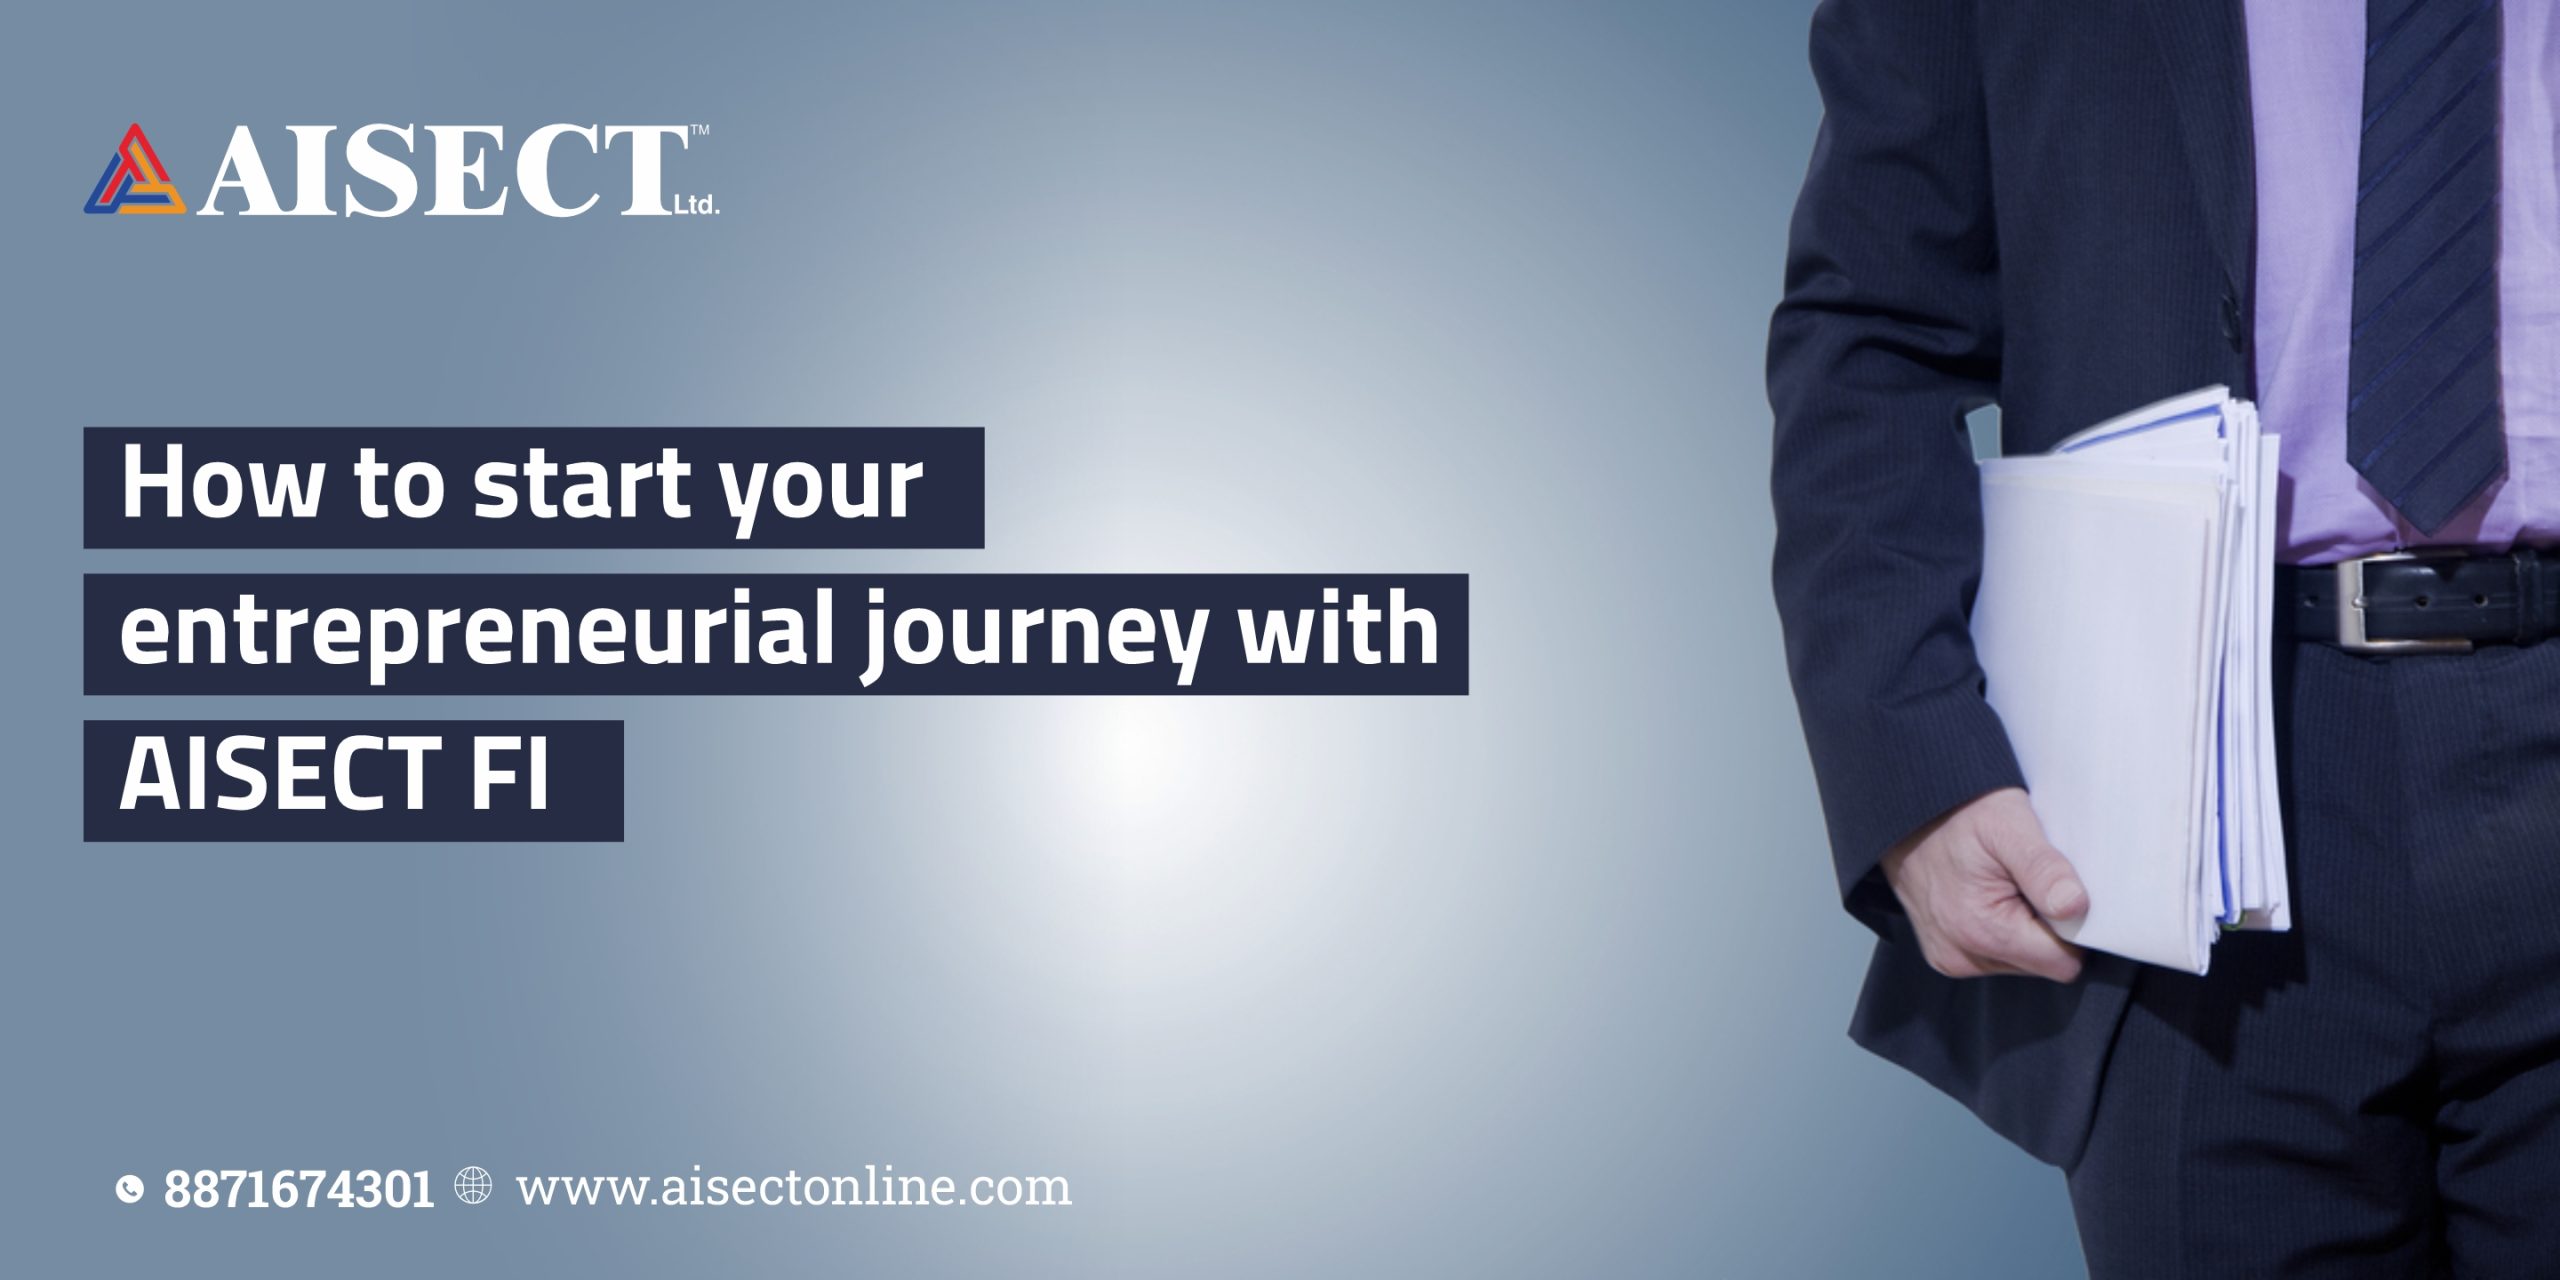 Start Your Entrepreneurial Journey with AISECT FI